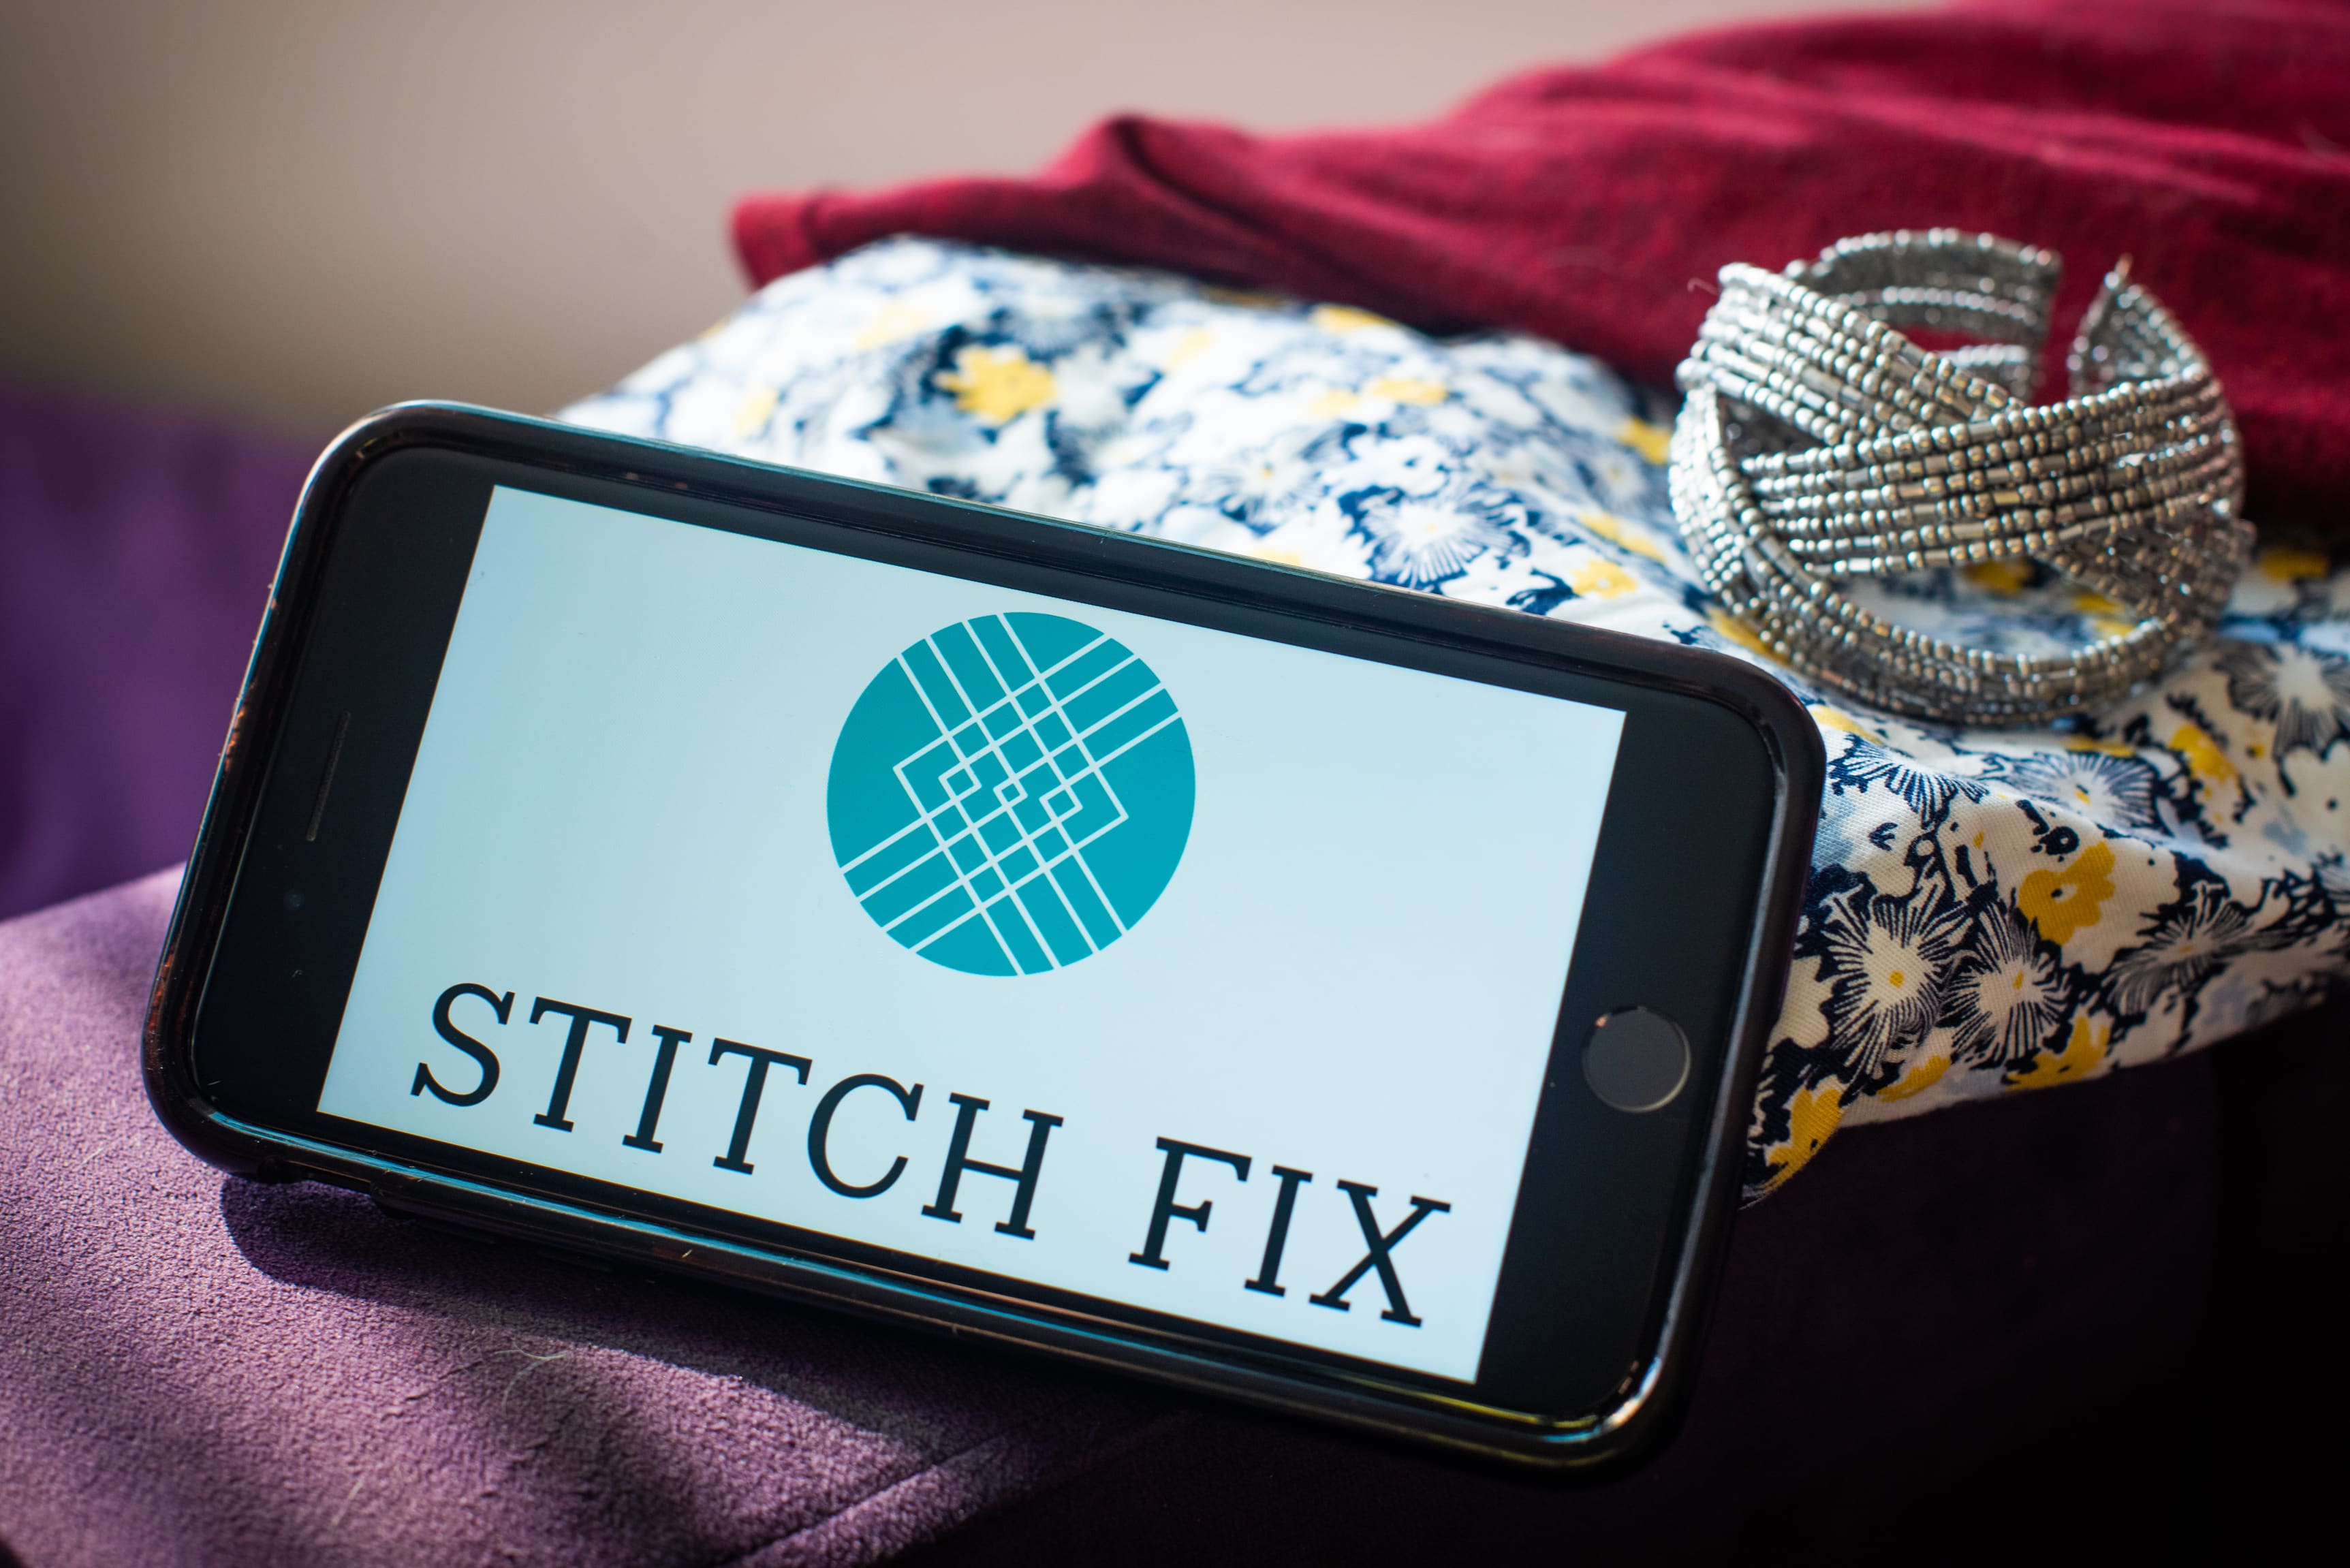 Stitch Fix shares fall, analyst says retailer has hit a ‘growth wall’